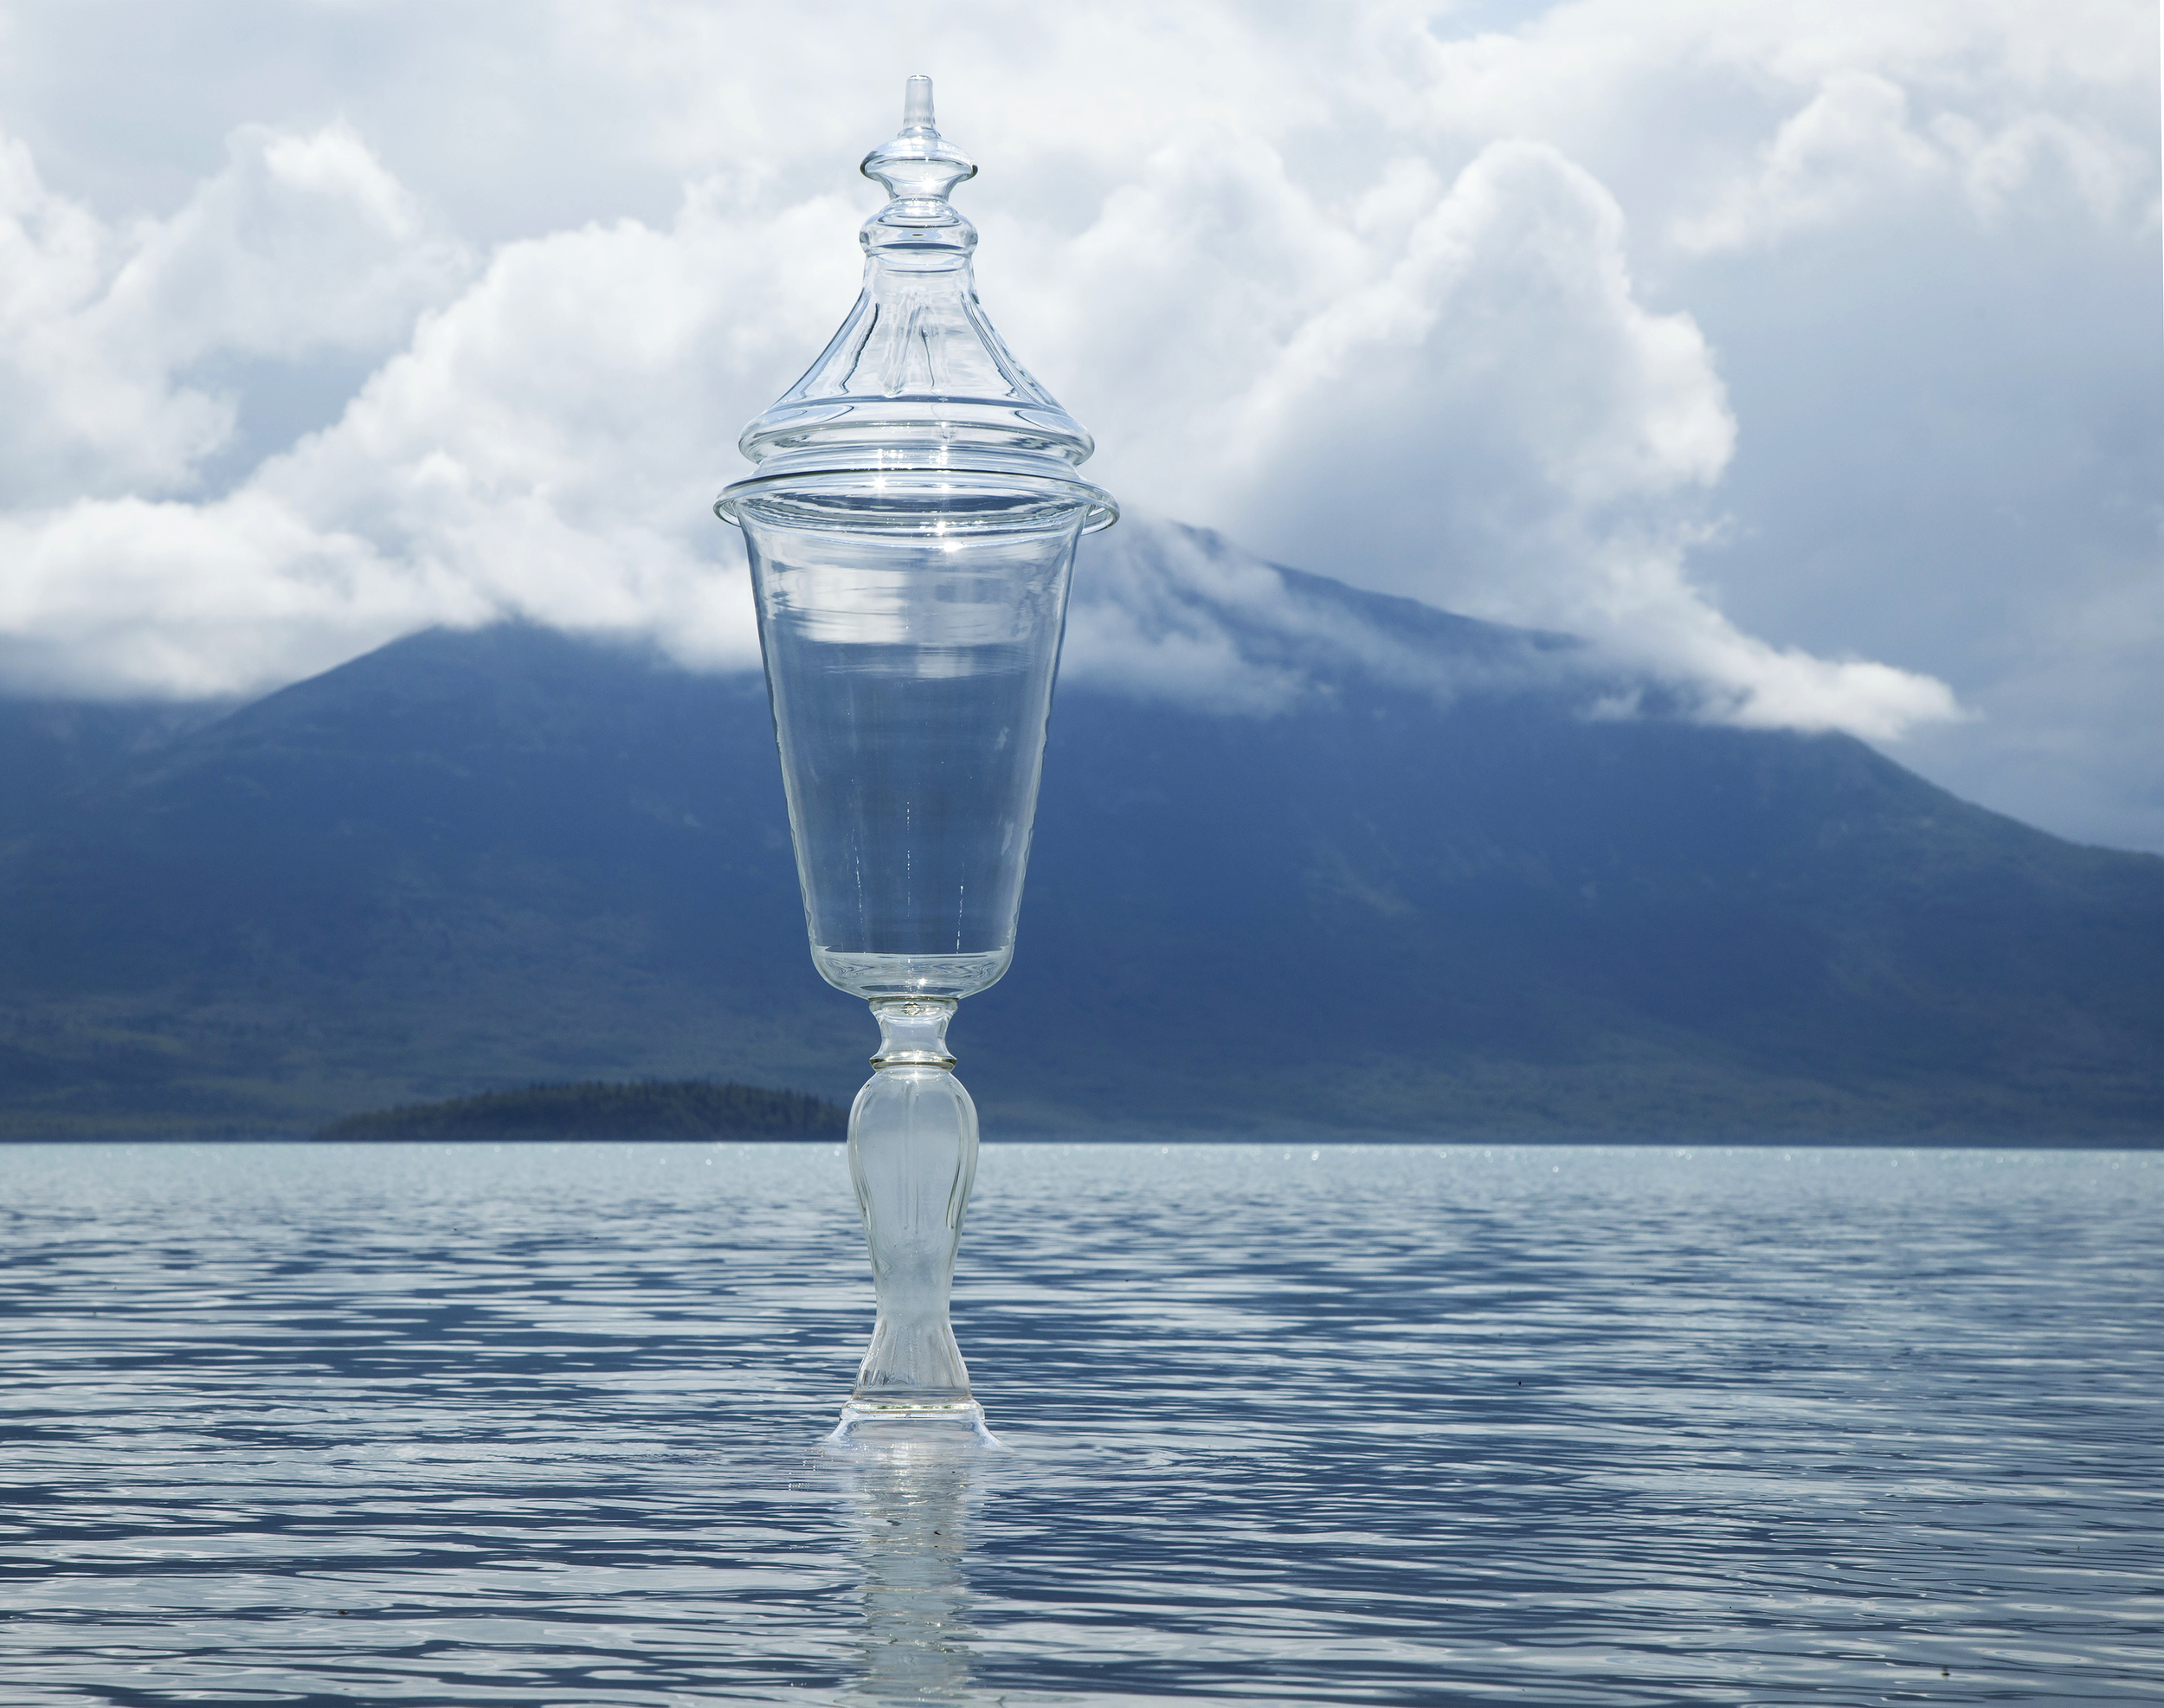 A glass chalice in a lake with a mountain in the background.